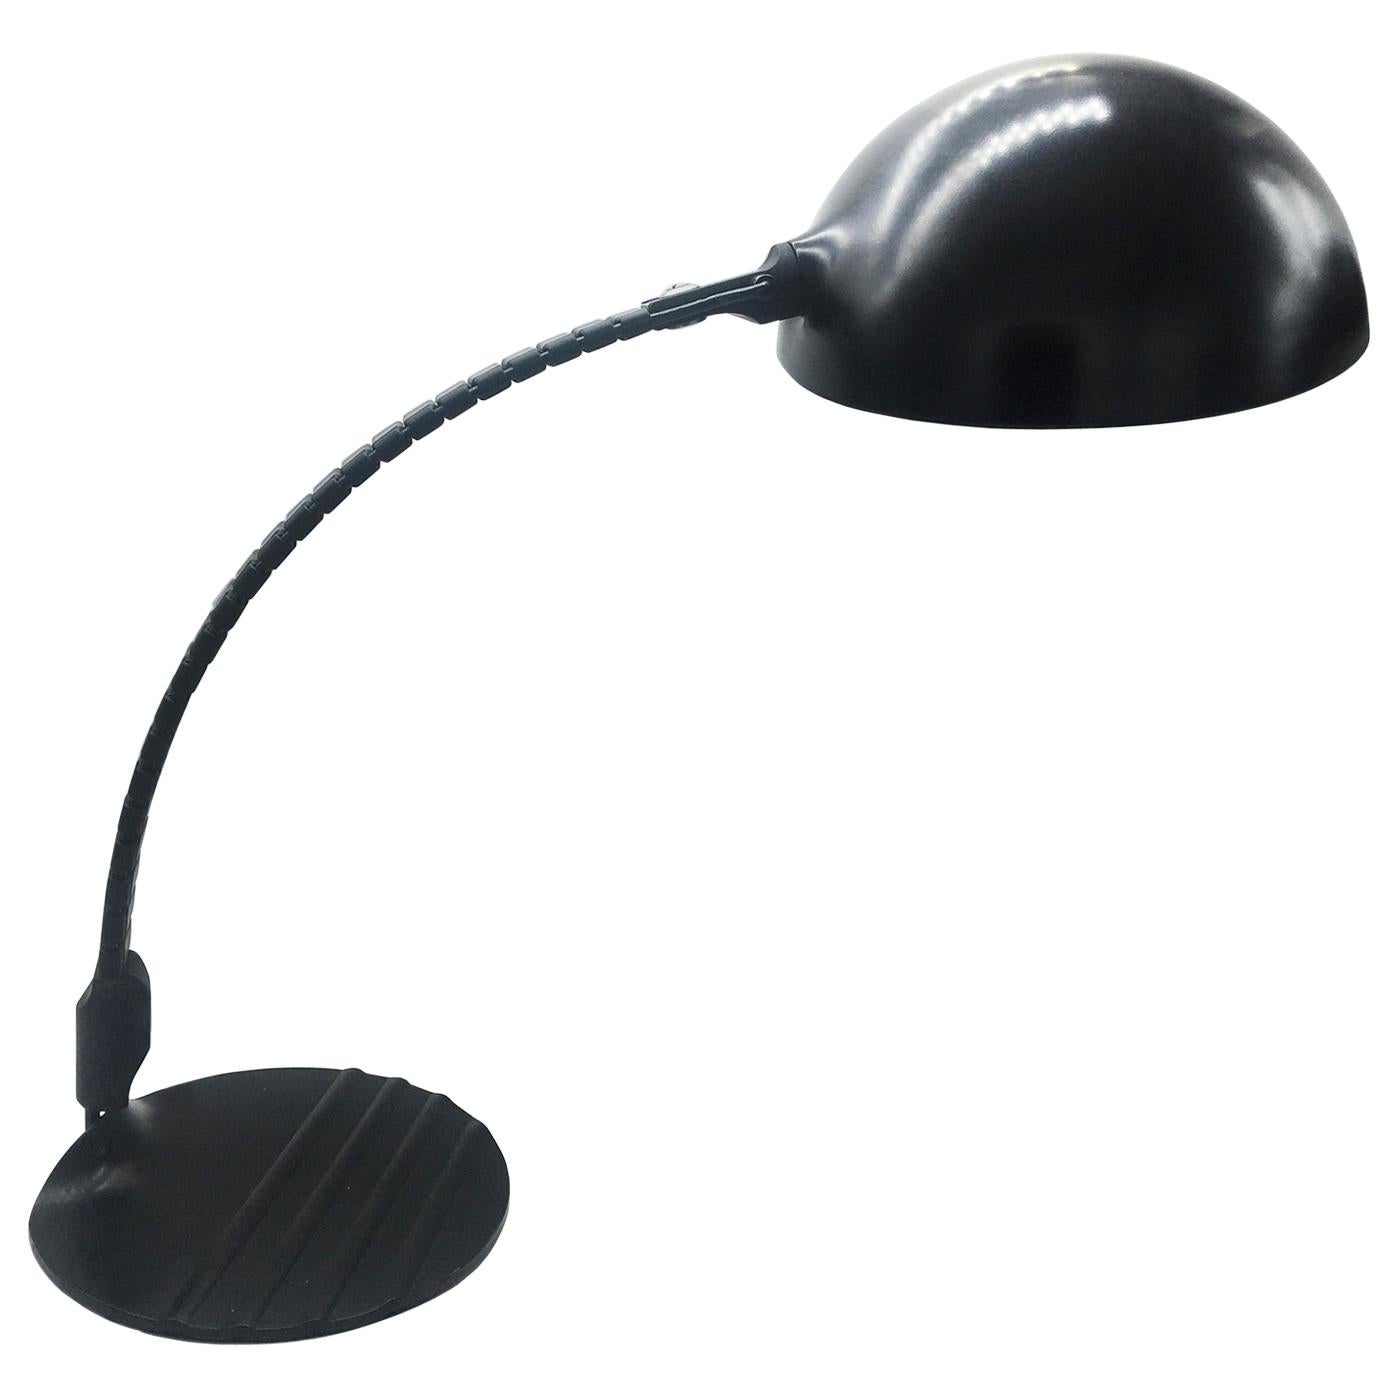 Cobra Table Lamp By Elio Martinelli, Halogen Table Lamp Model 4300